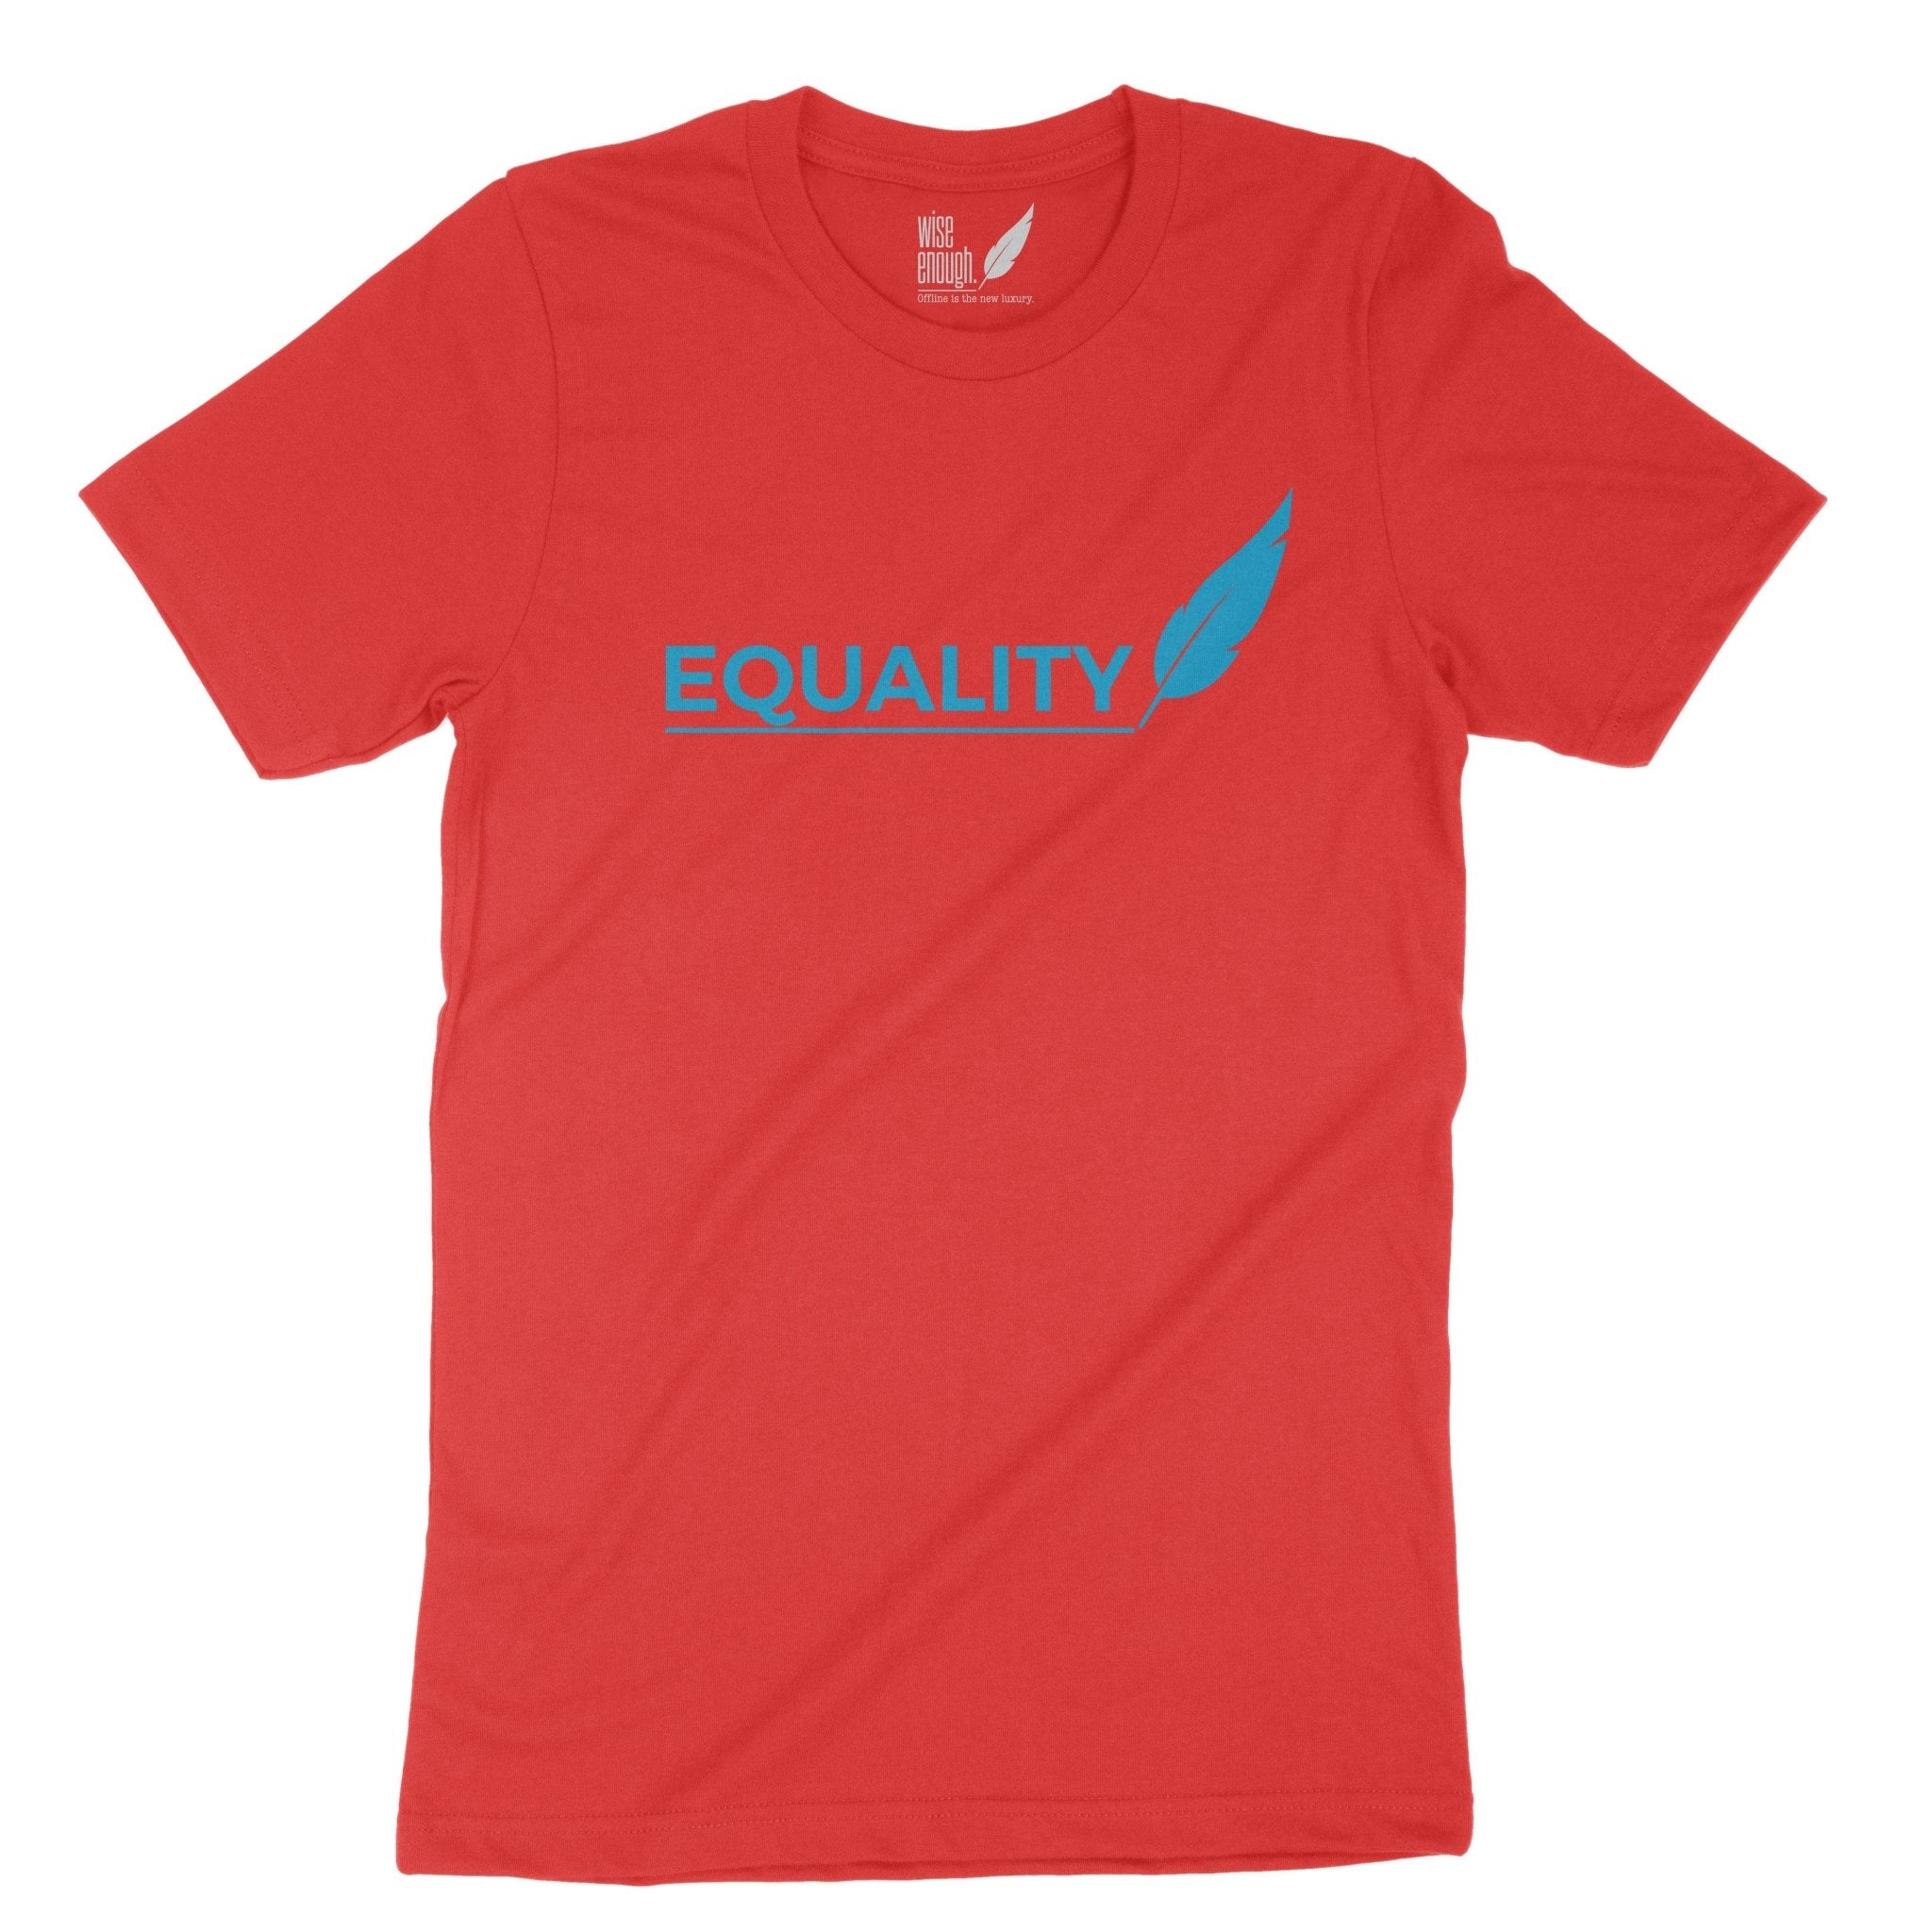 T-Shirt Equality - wise enough